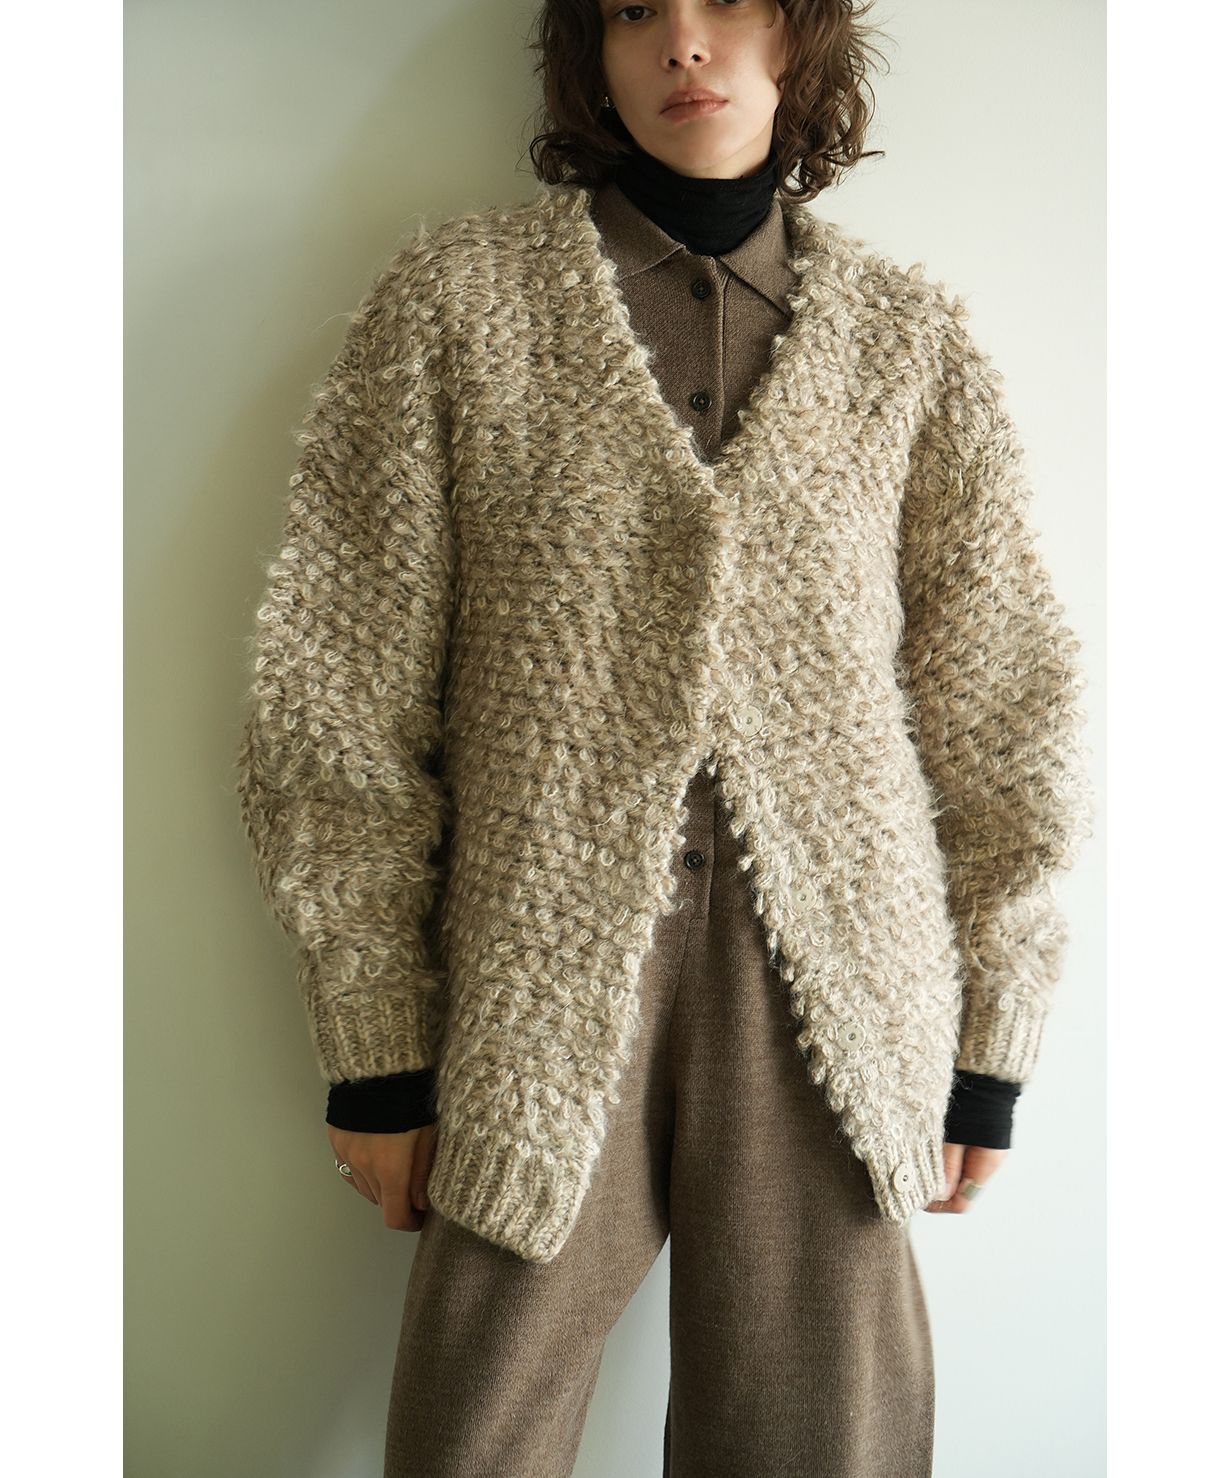 MIX LOOP MOHAIR KNIT CARDIGANsize2